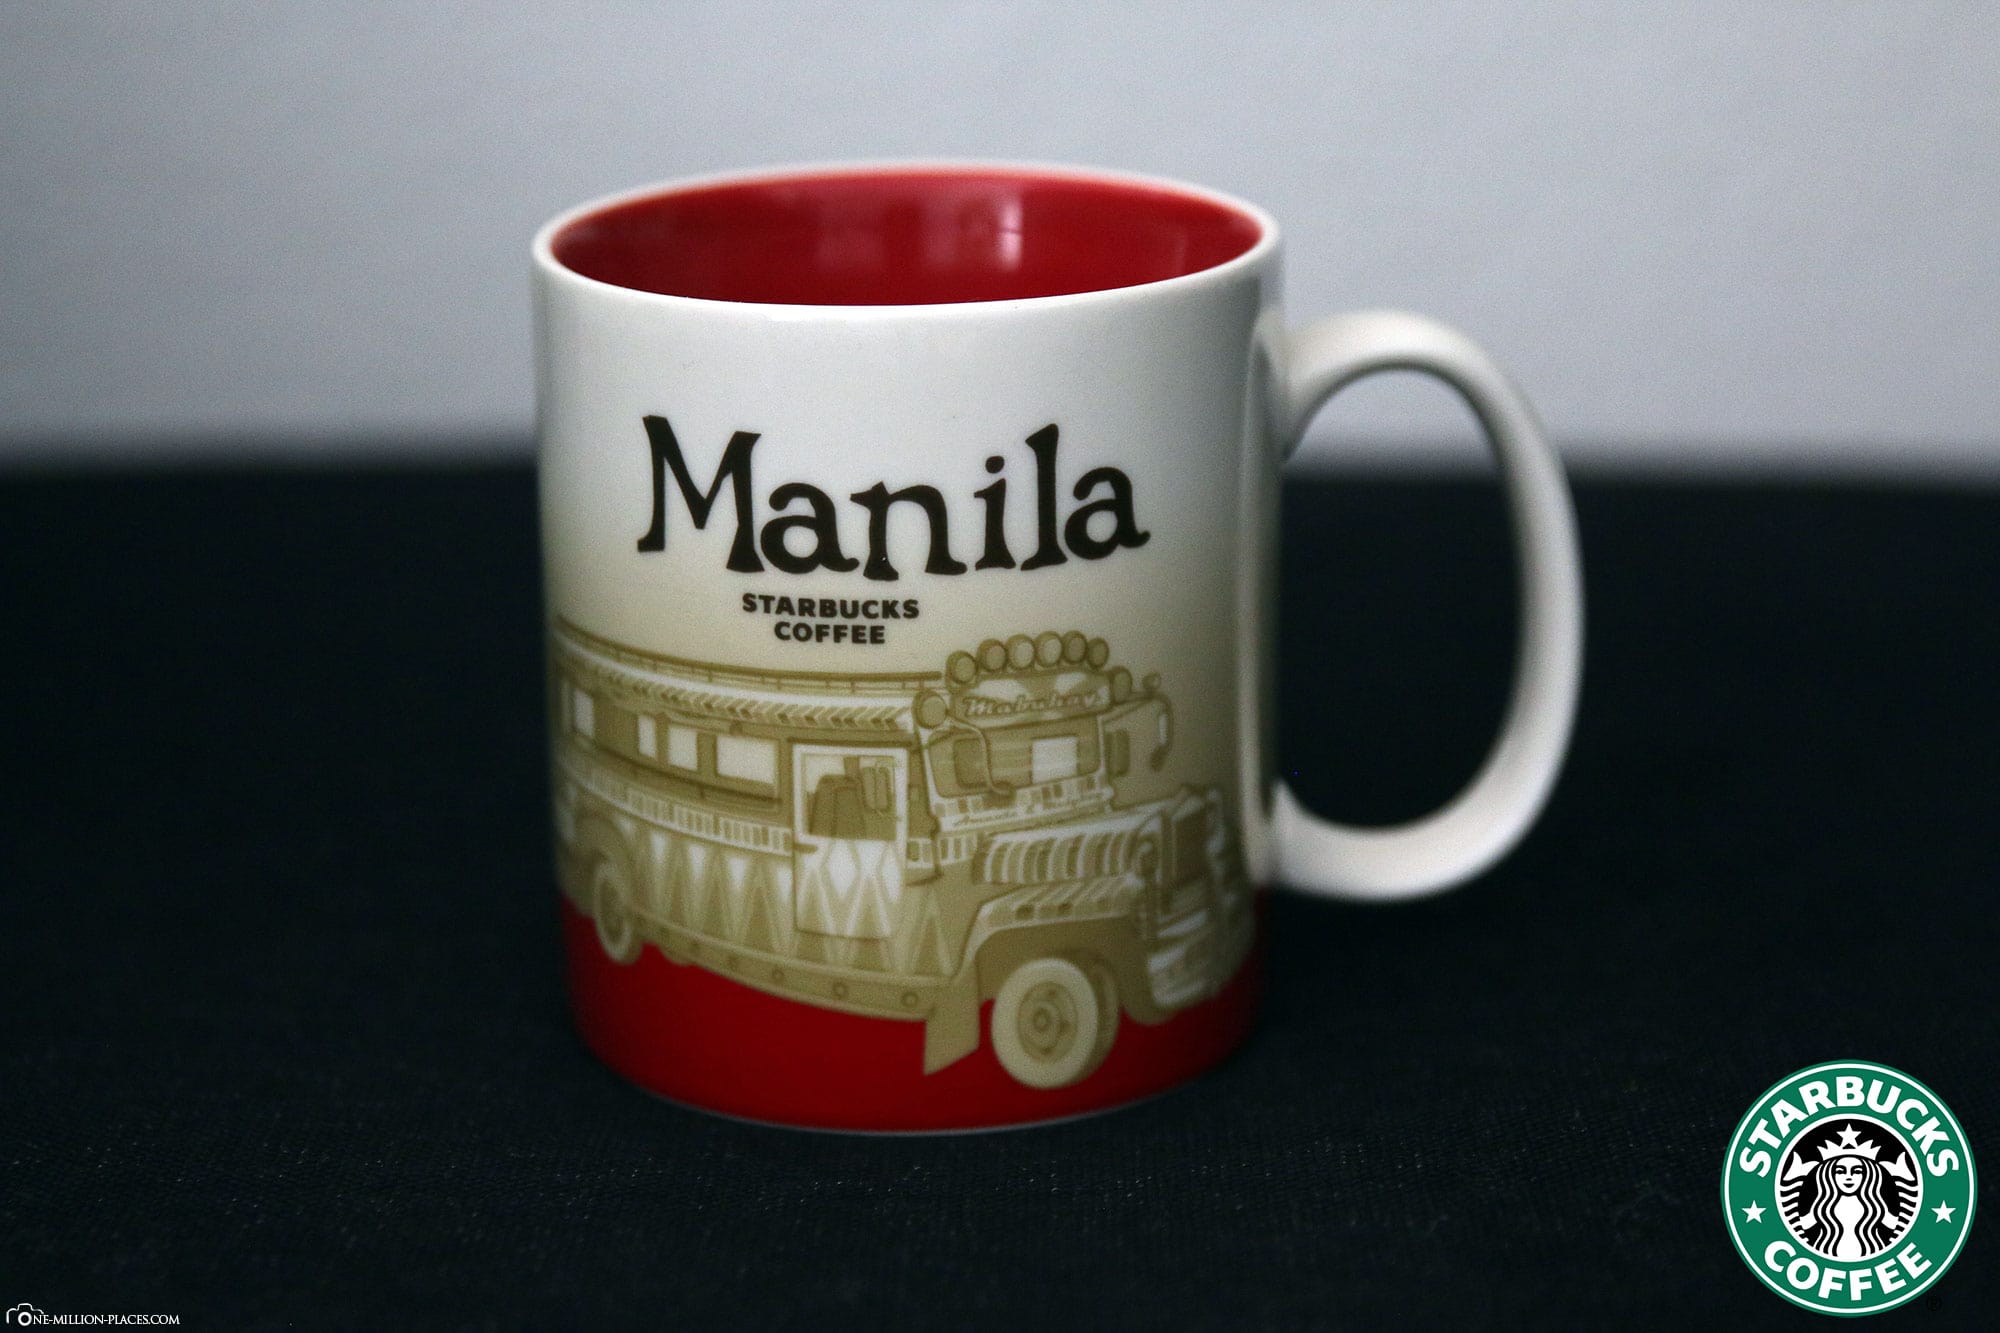 Manila, Starbucks Cup, Global Icon Series, City Mugs, Collection, Philippines, Travelreport